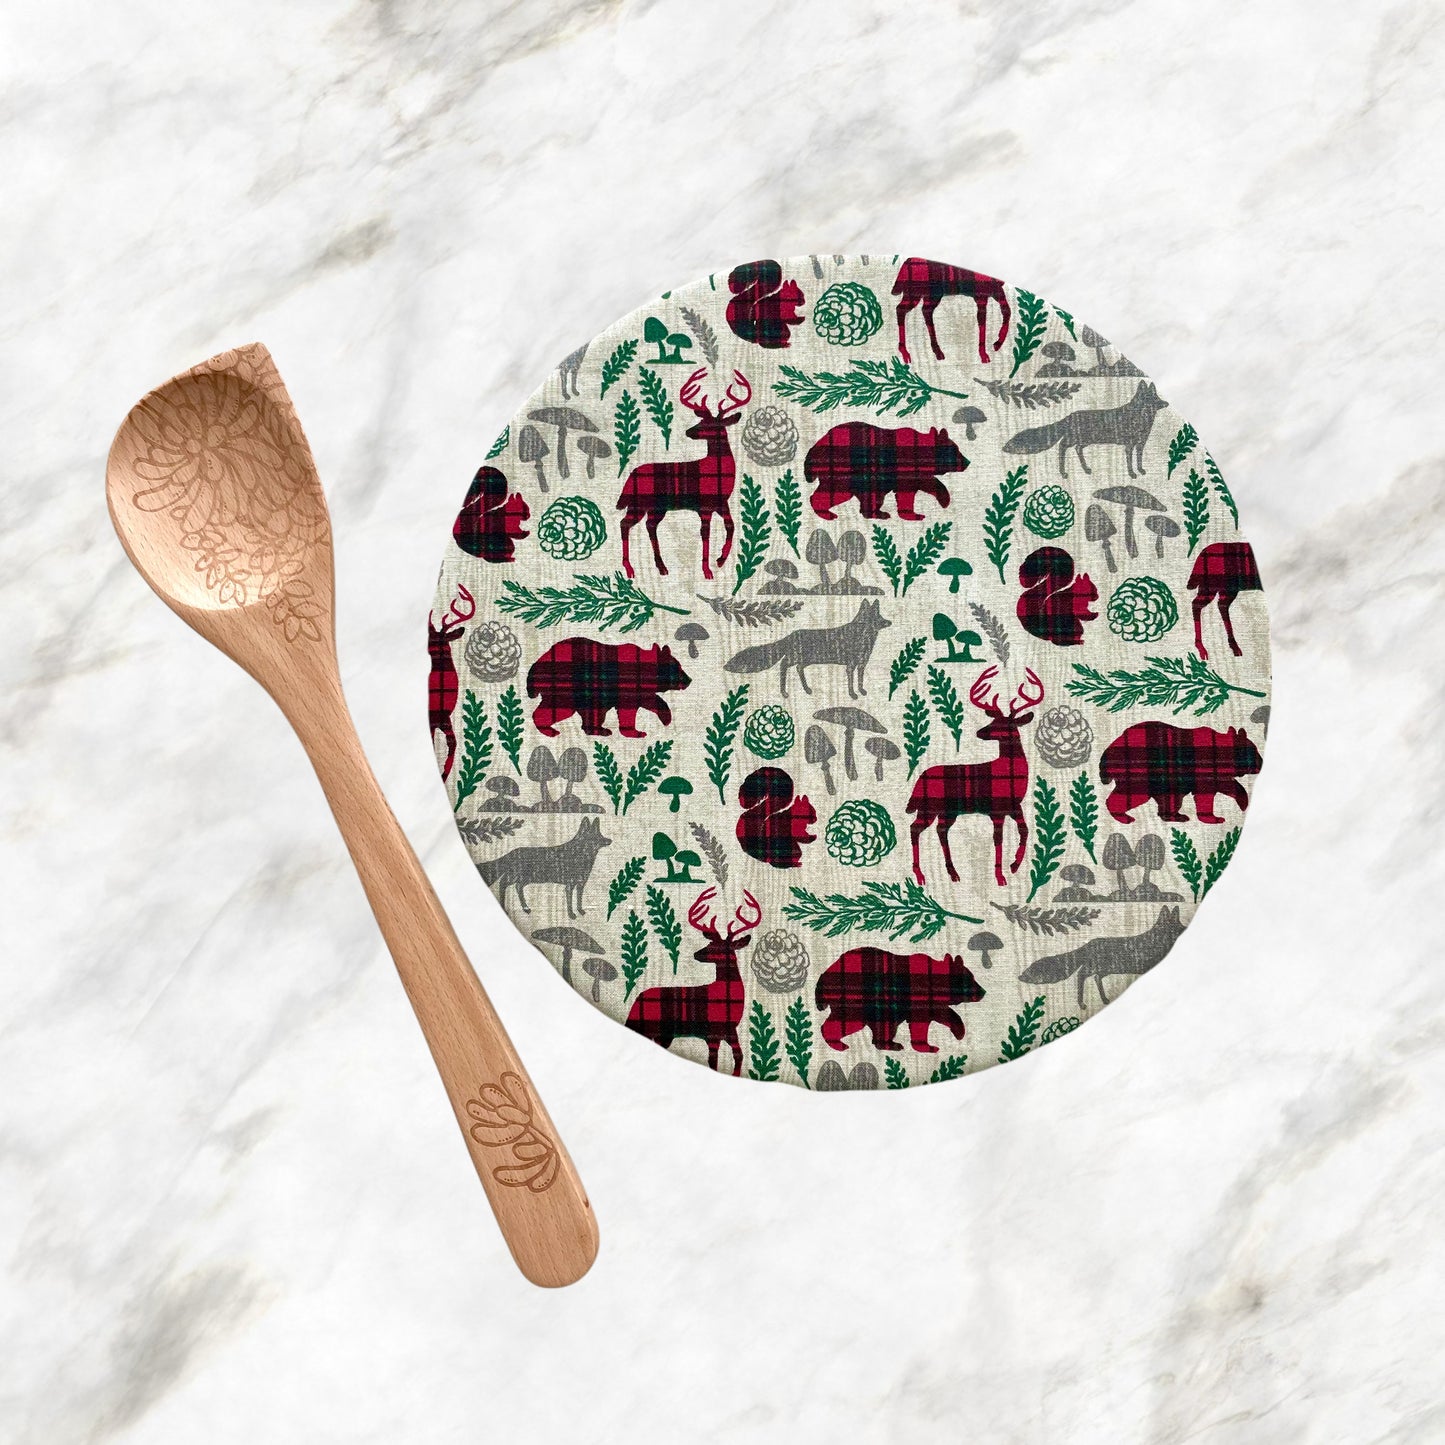 Stand Mixer Bowl Covers - Christmas Forest Animals